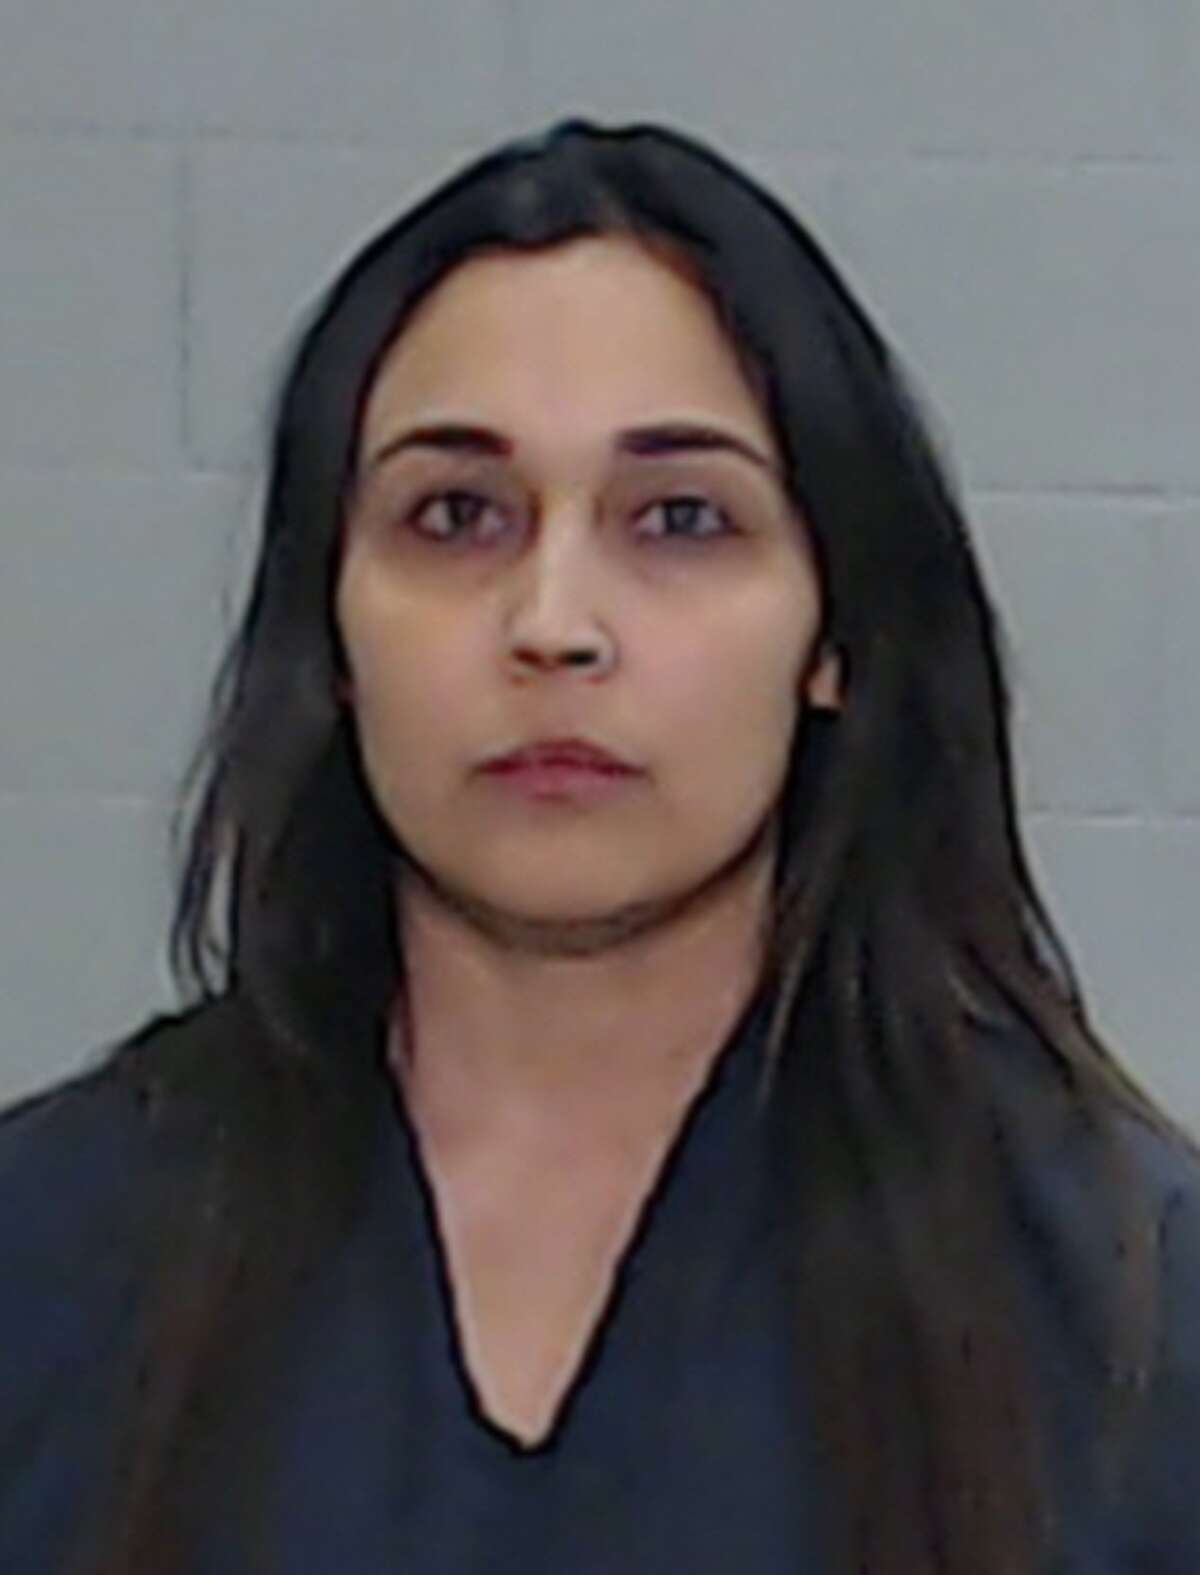 New Mexico woman wanted for murder arrested in Odessa pic